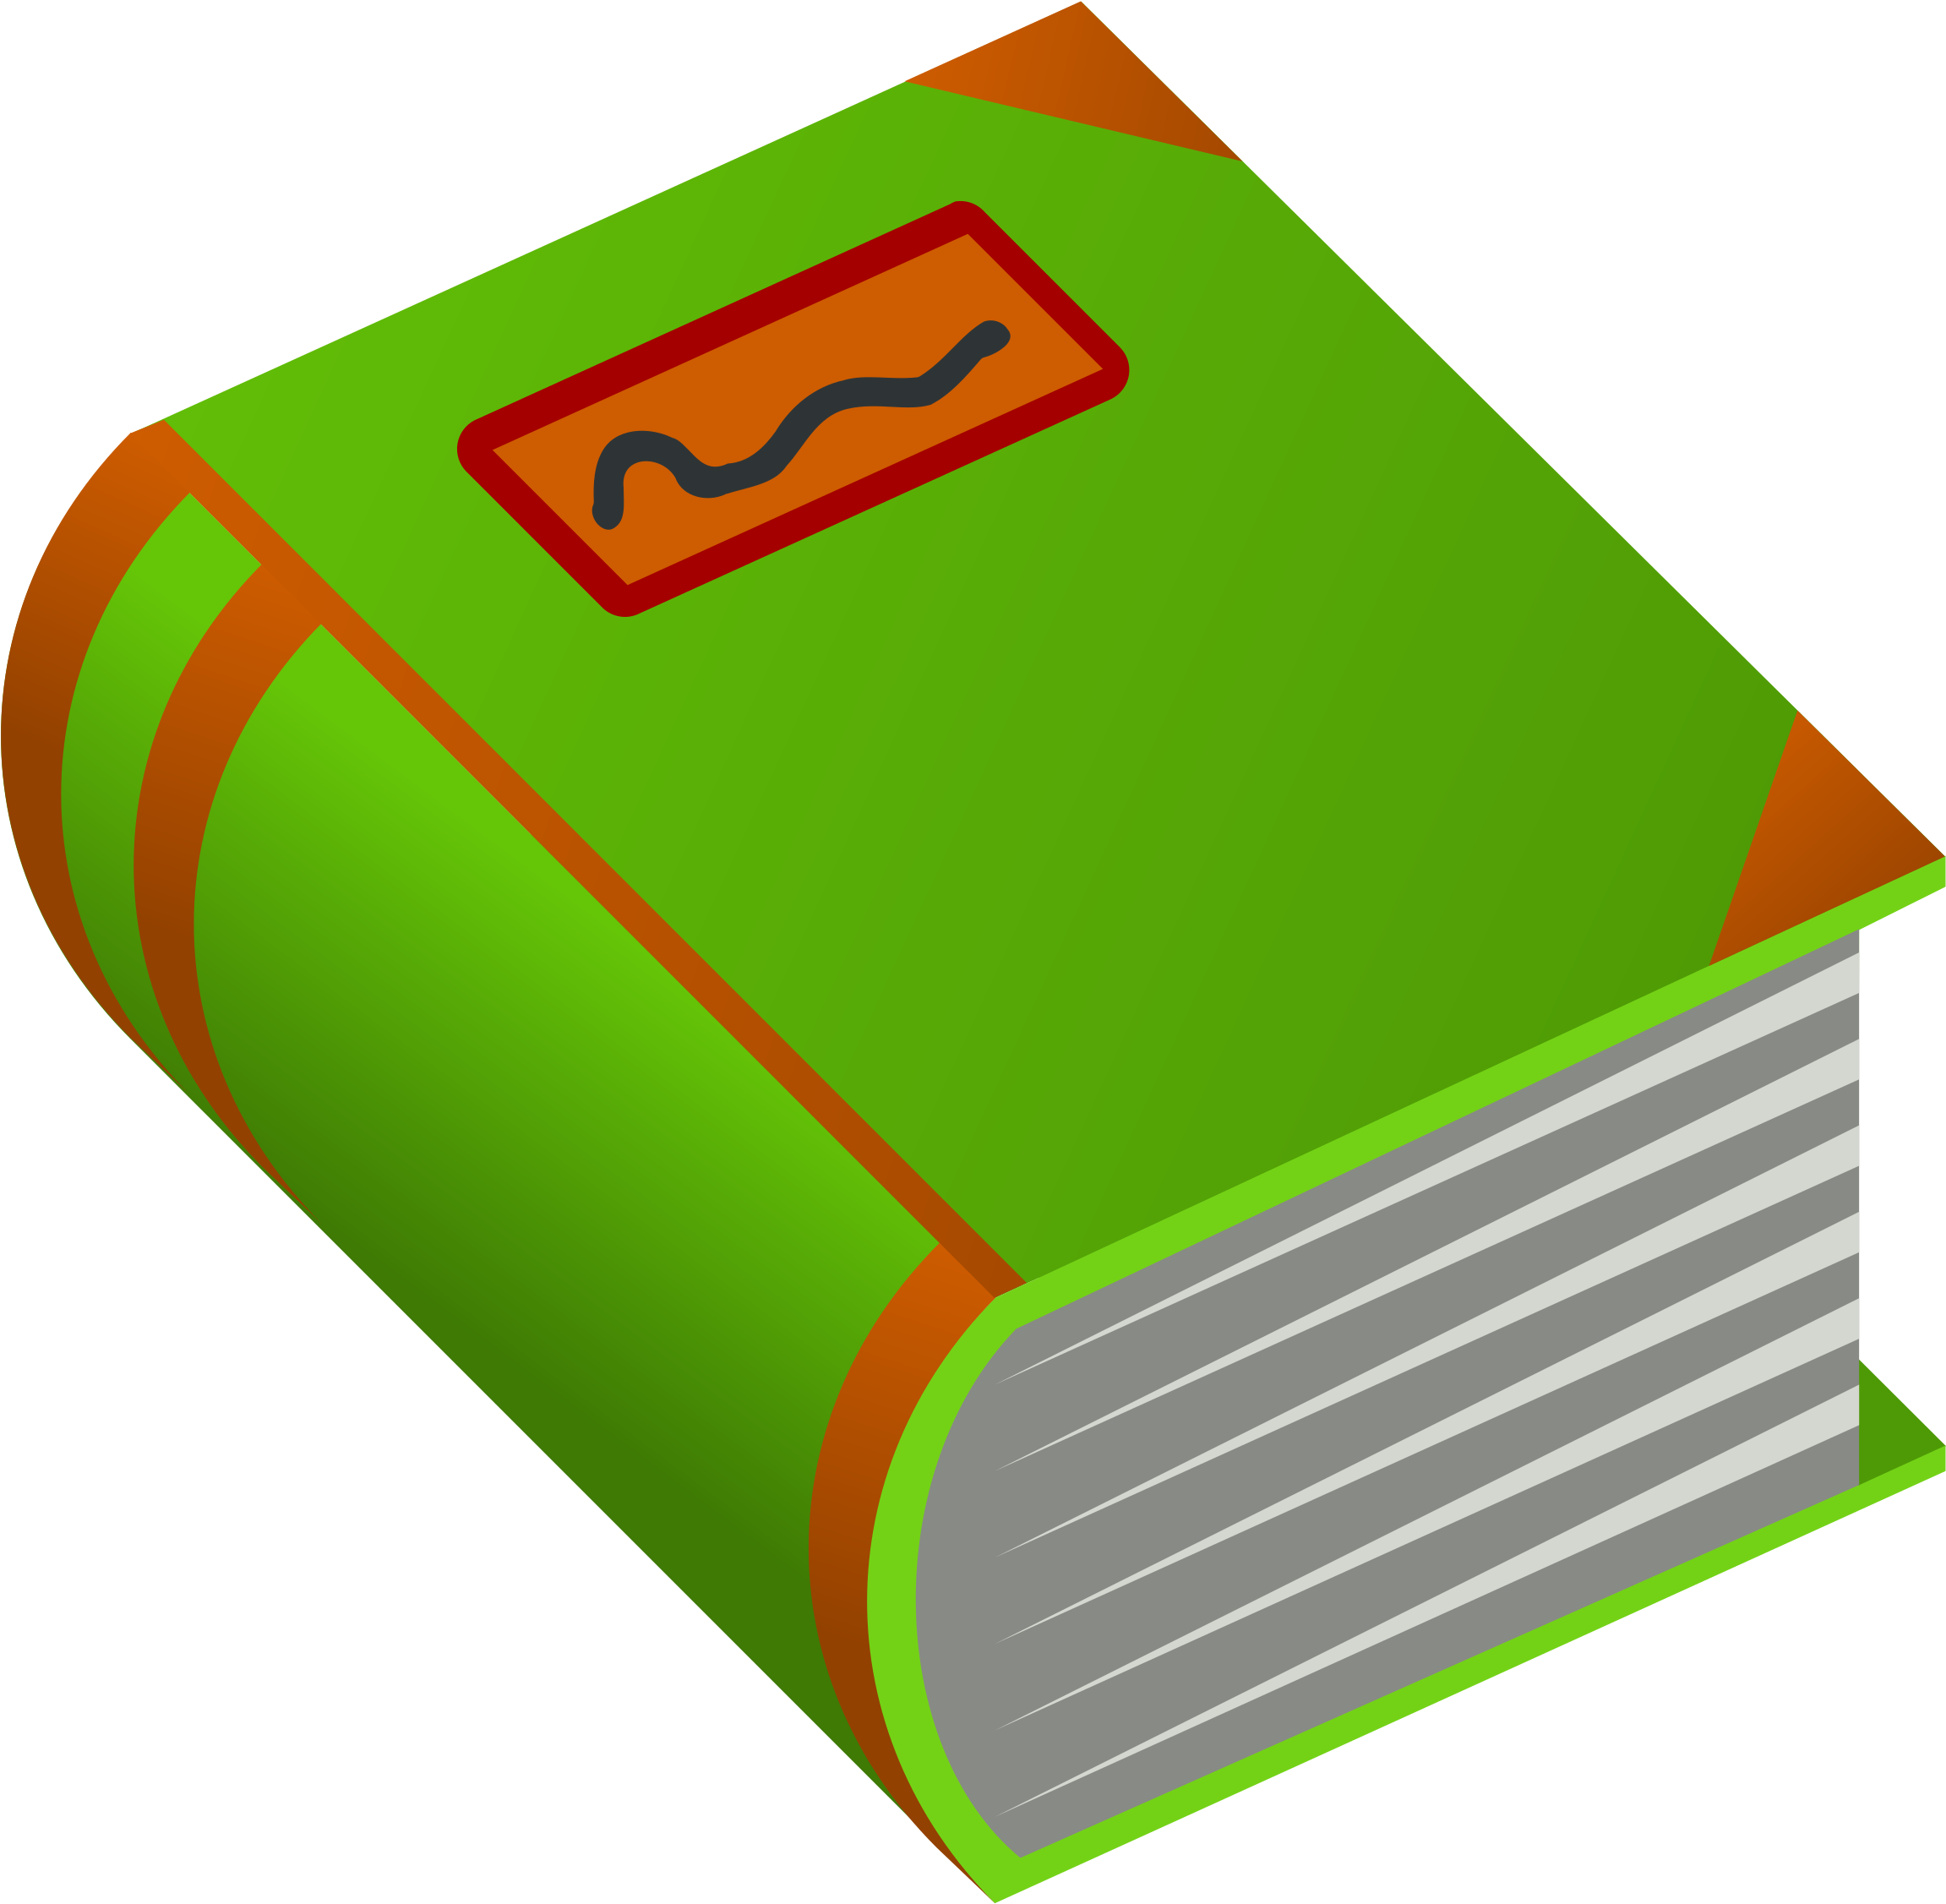 Clipart - Thick Book Clipart.